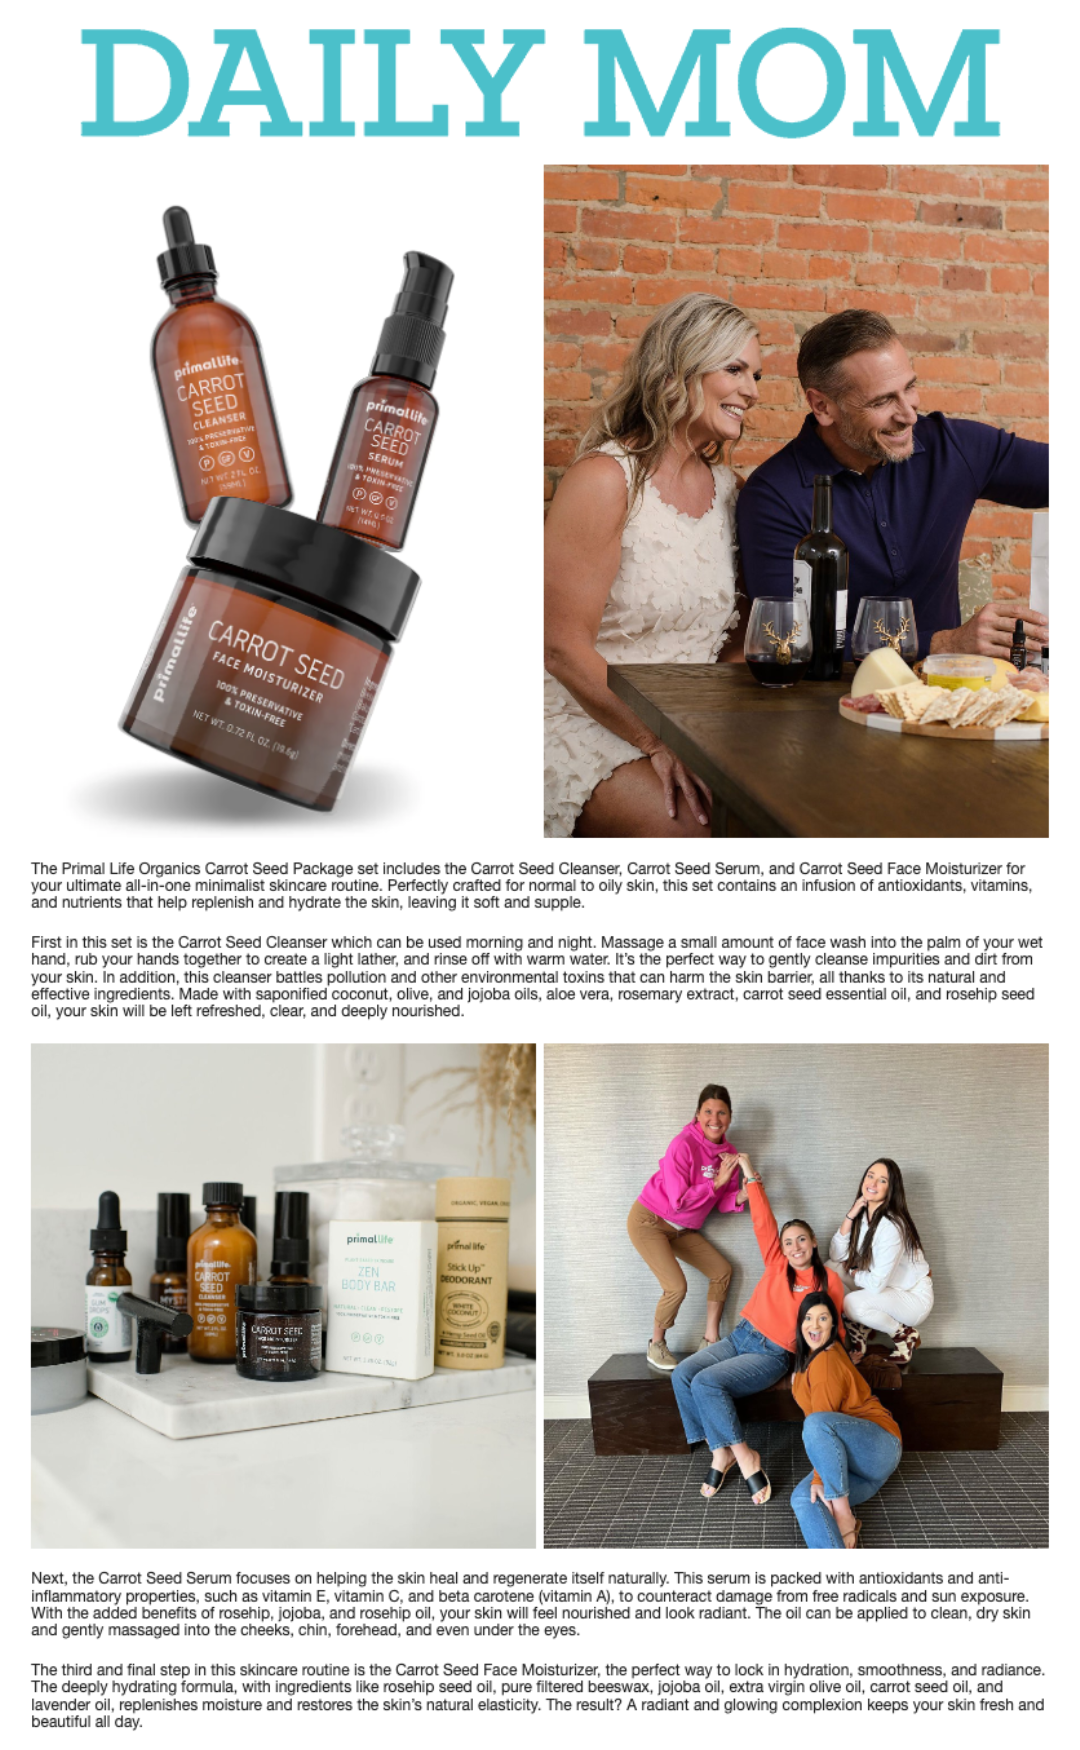 Primal Life Organics Carrot Seed Skincare Package Featured In Daily Mom